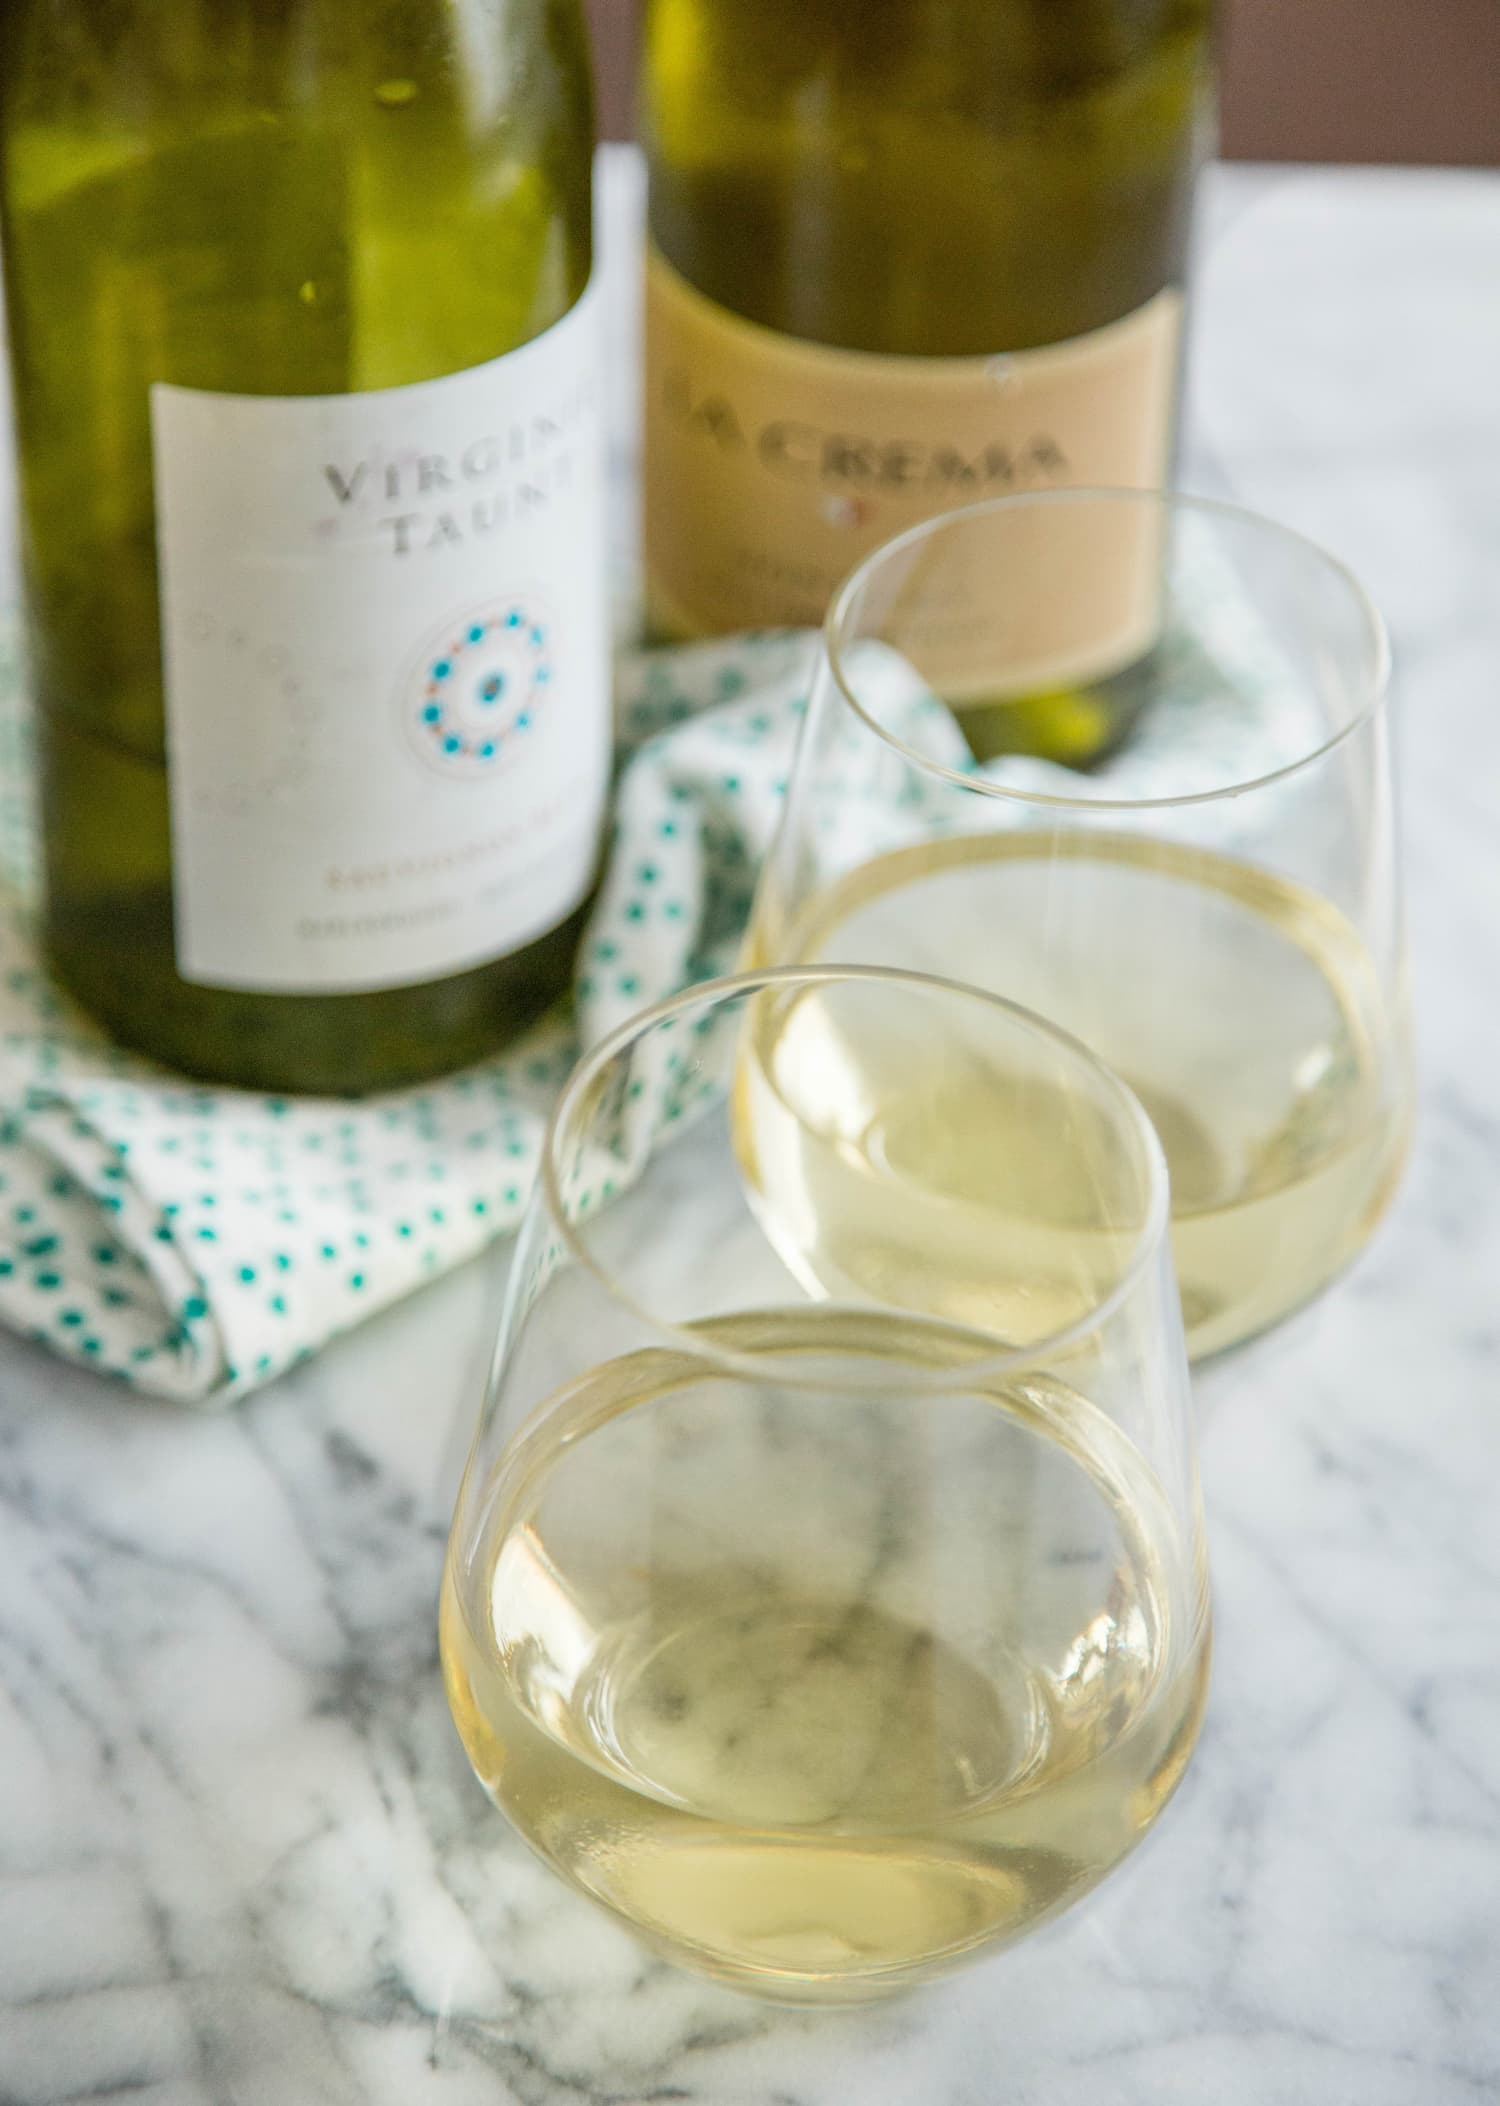 The 5 Best White Wines for Cooking